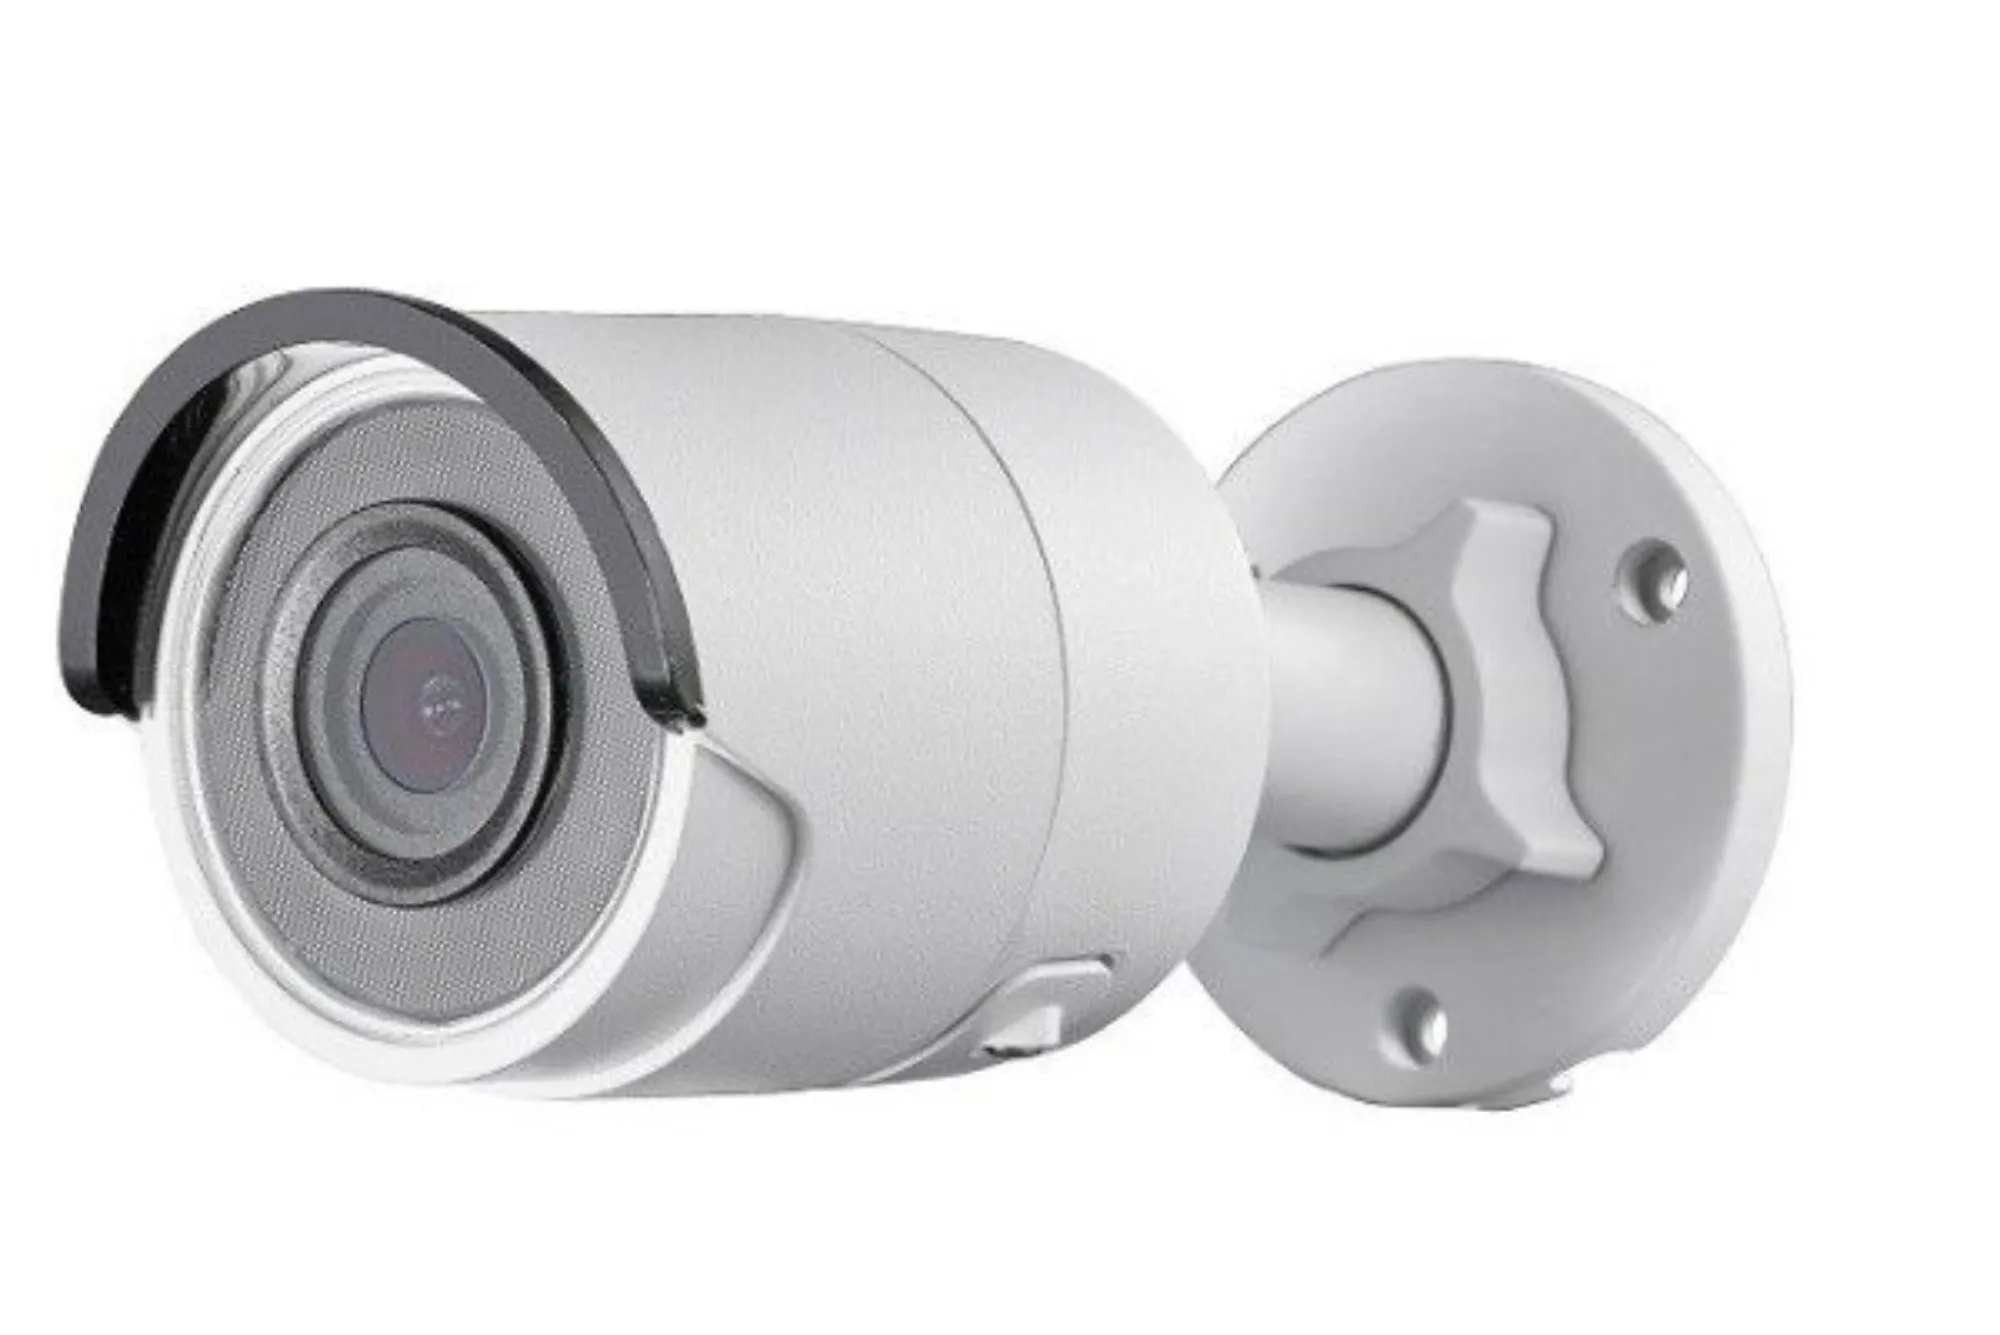 Enhancing SMB Security with Hikvision's Rotating Cameras